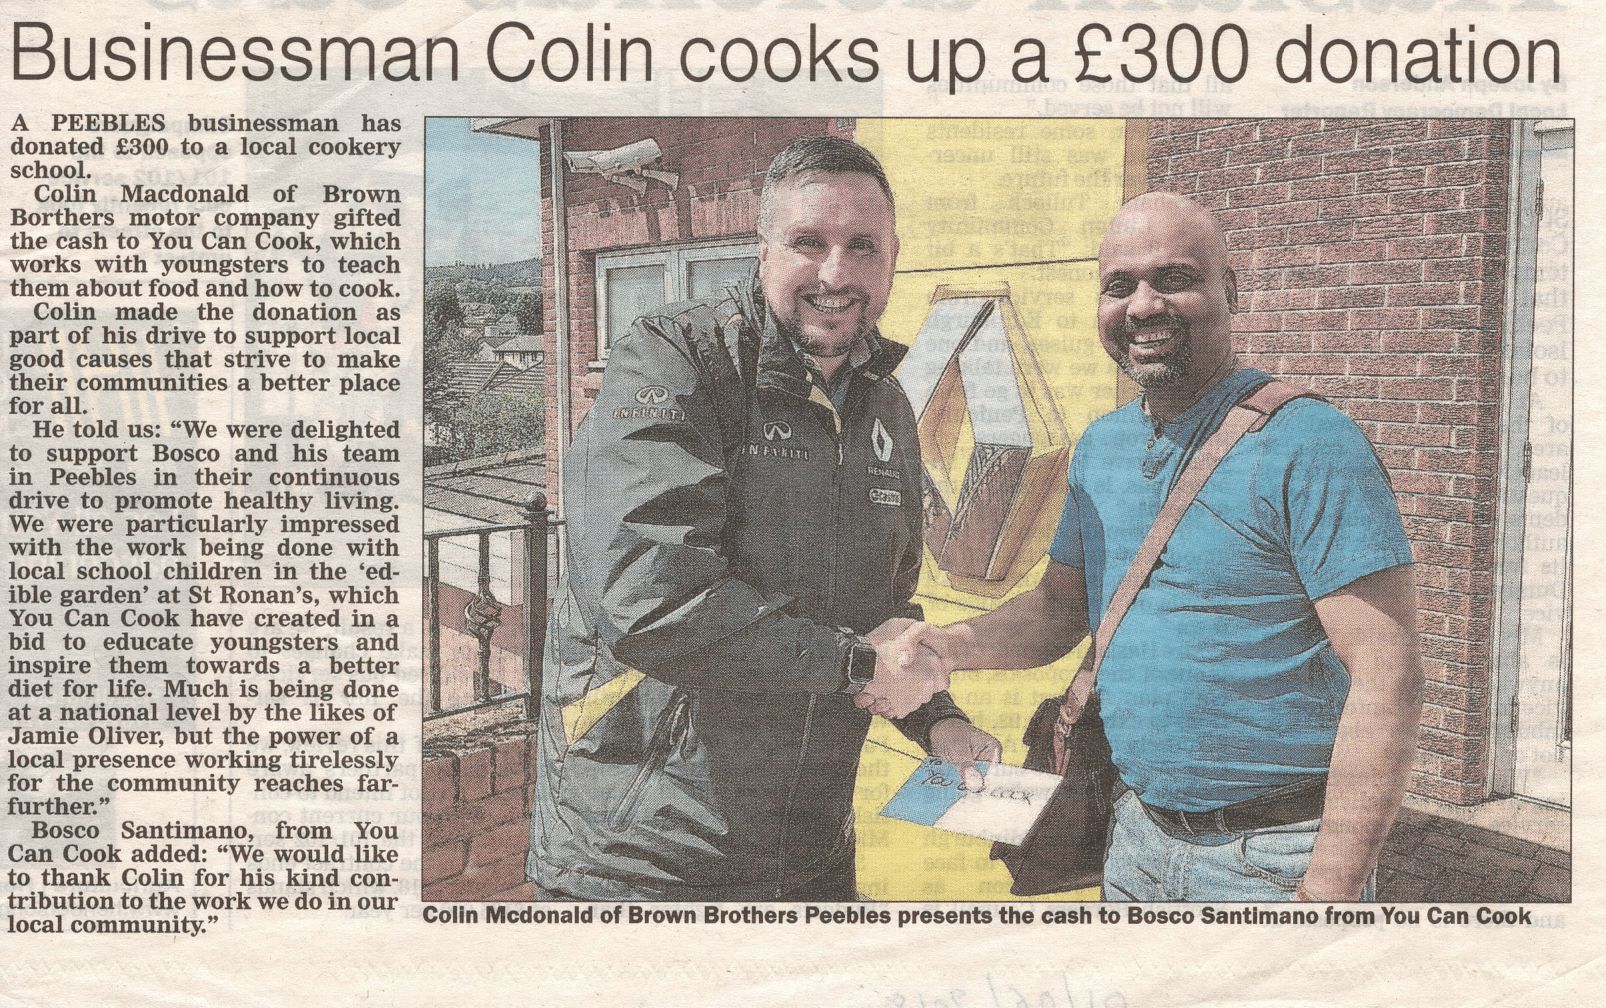 Press Clipping: Businessman Colin cooks up a £300 donation